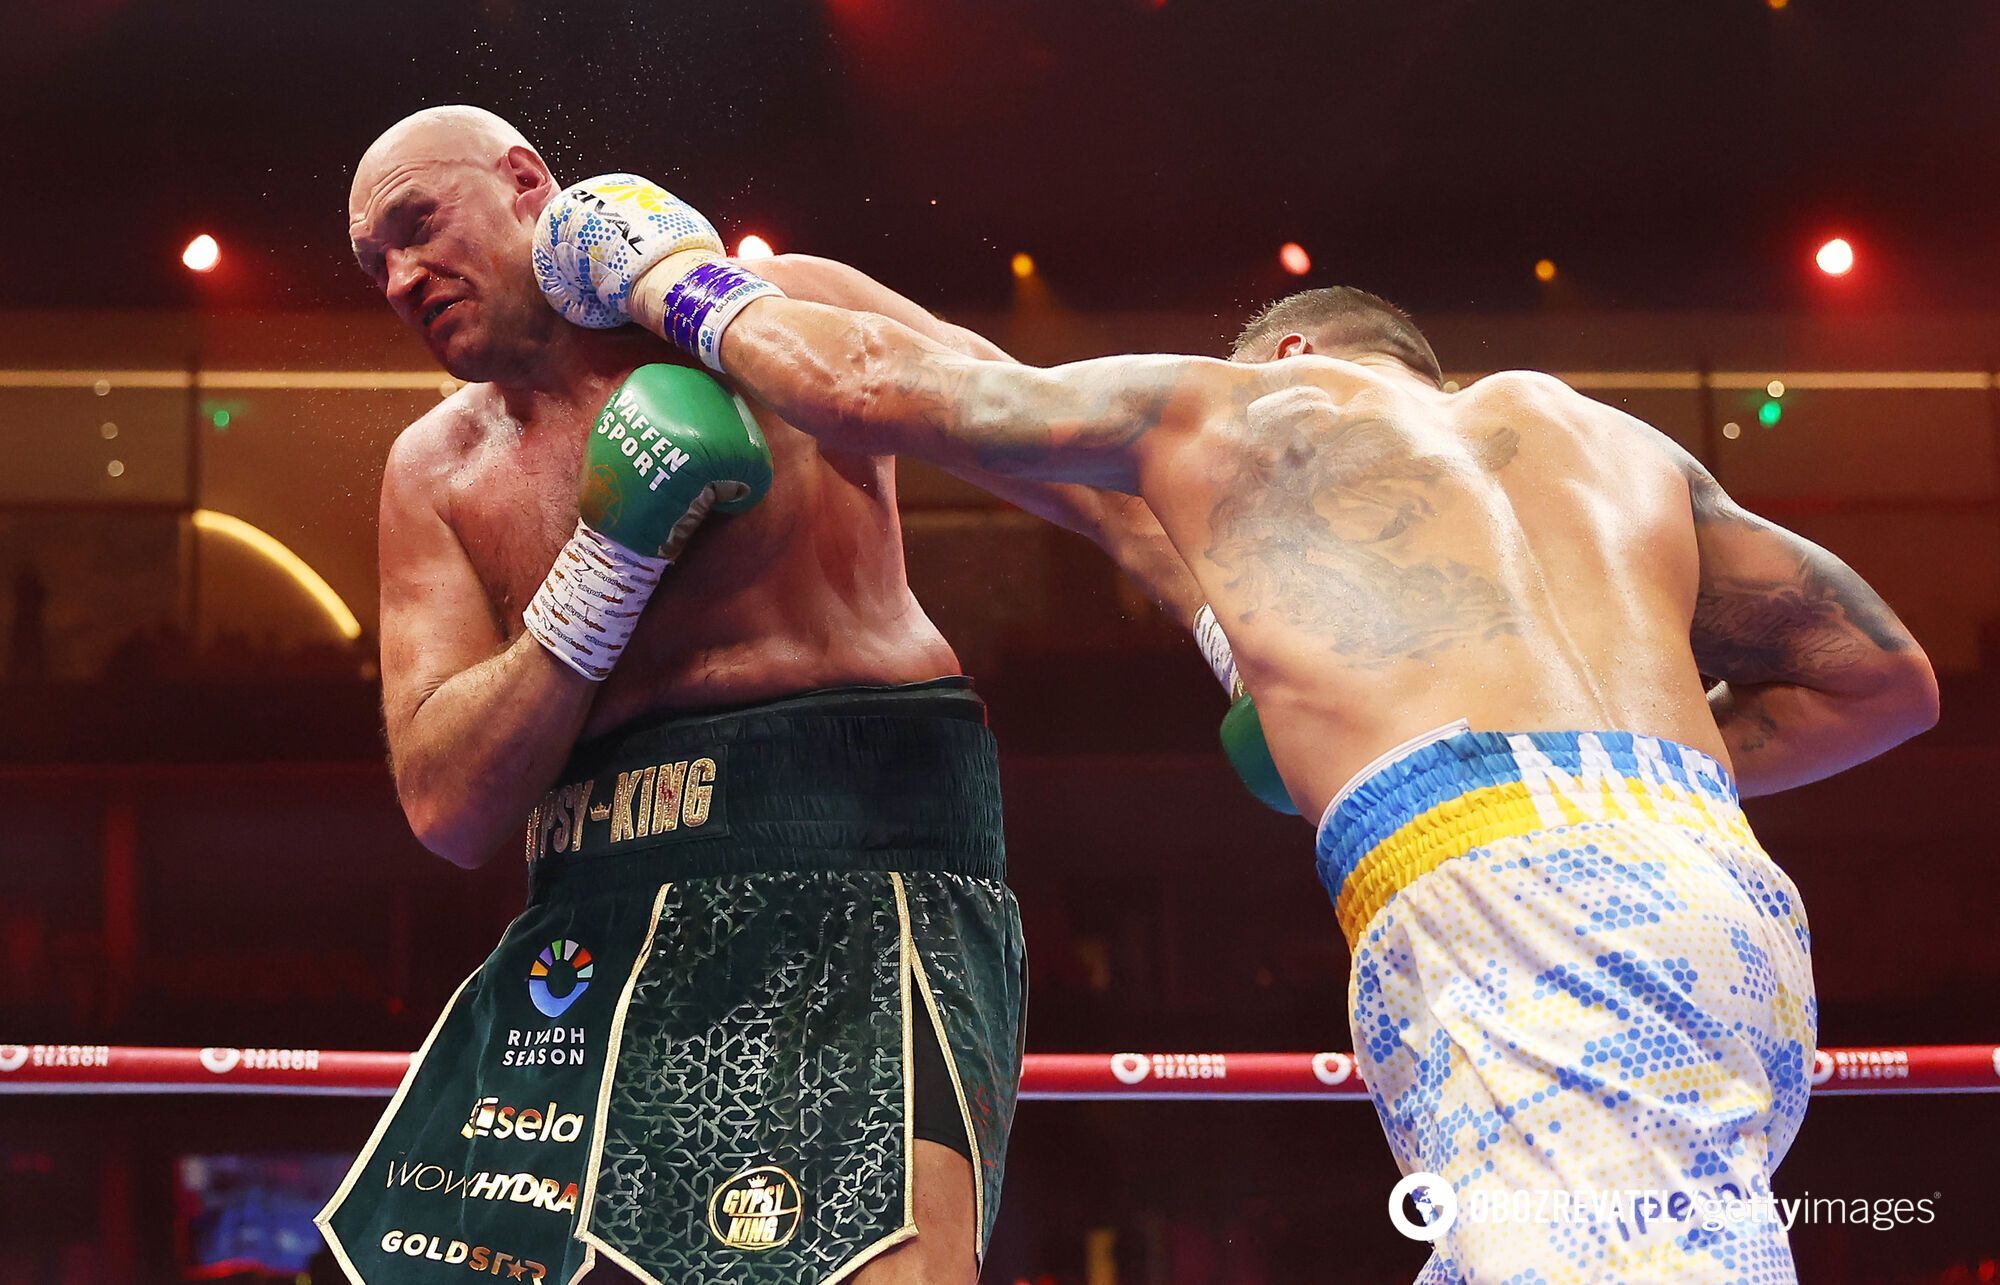 It happened before the knockdown. The turning point in the Usyk – Fury fight has become known